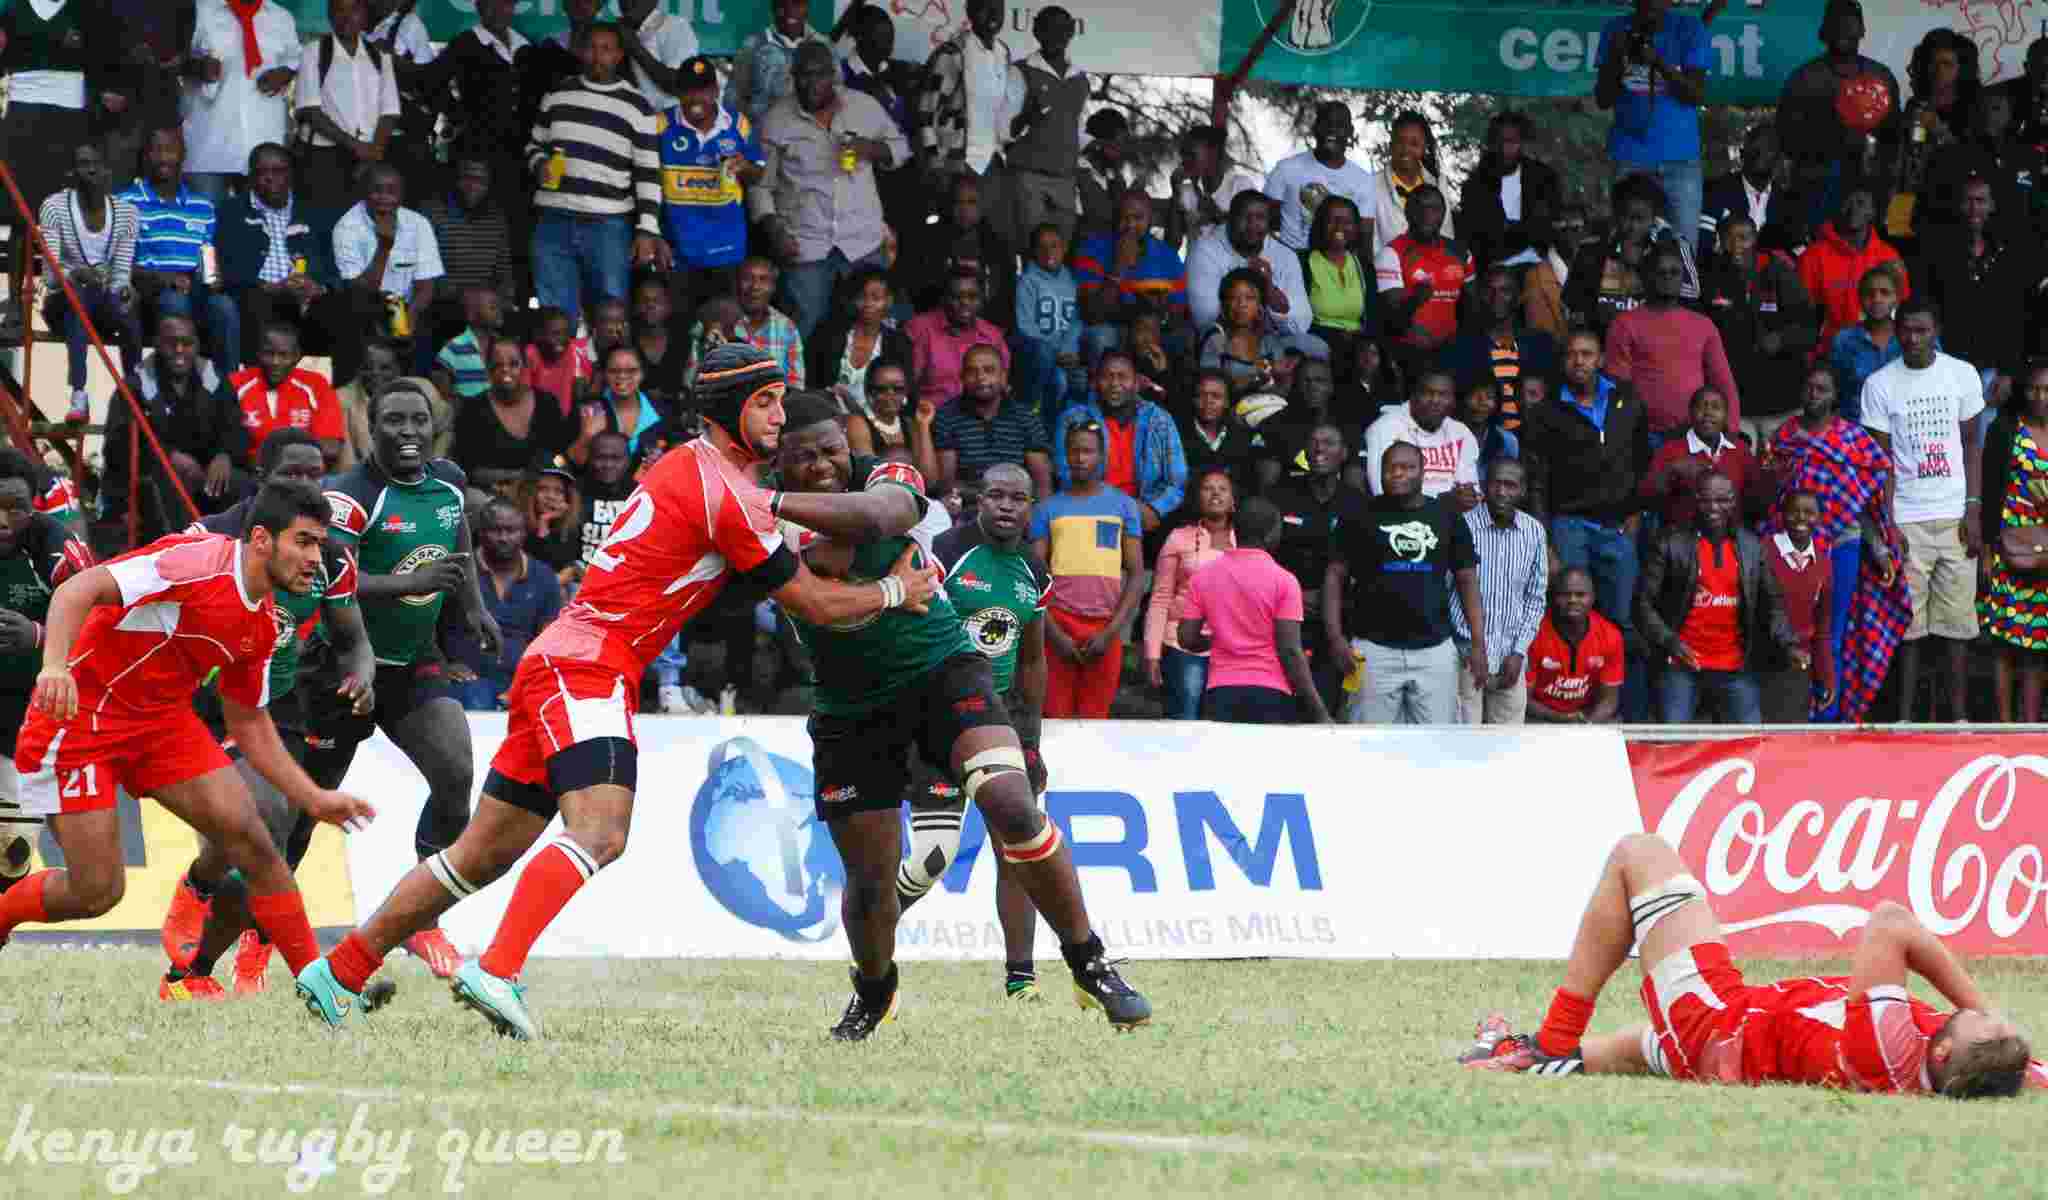 Kenya 15s are eager to express themselves : Dominique Habimana